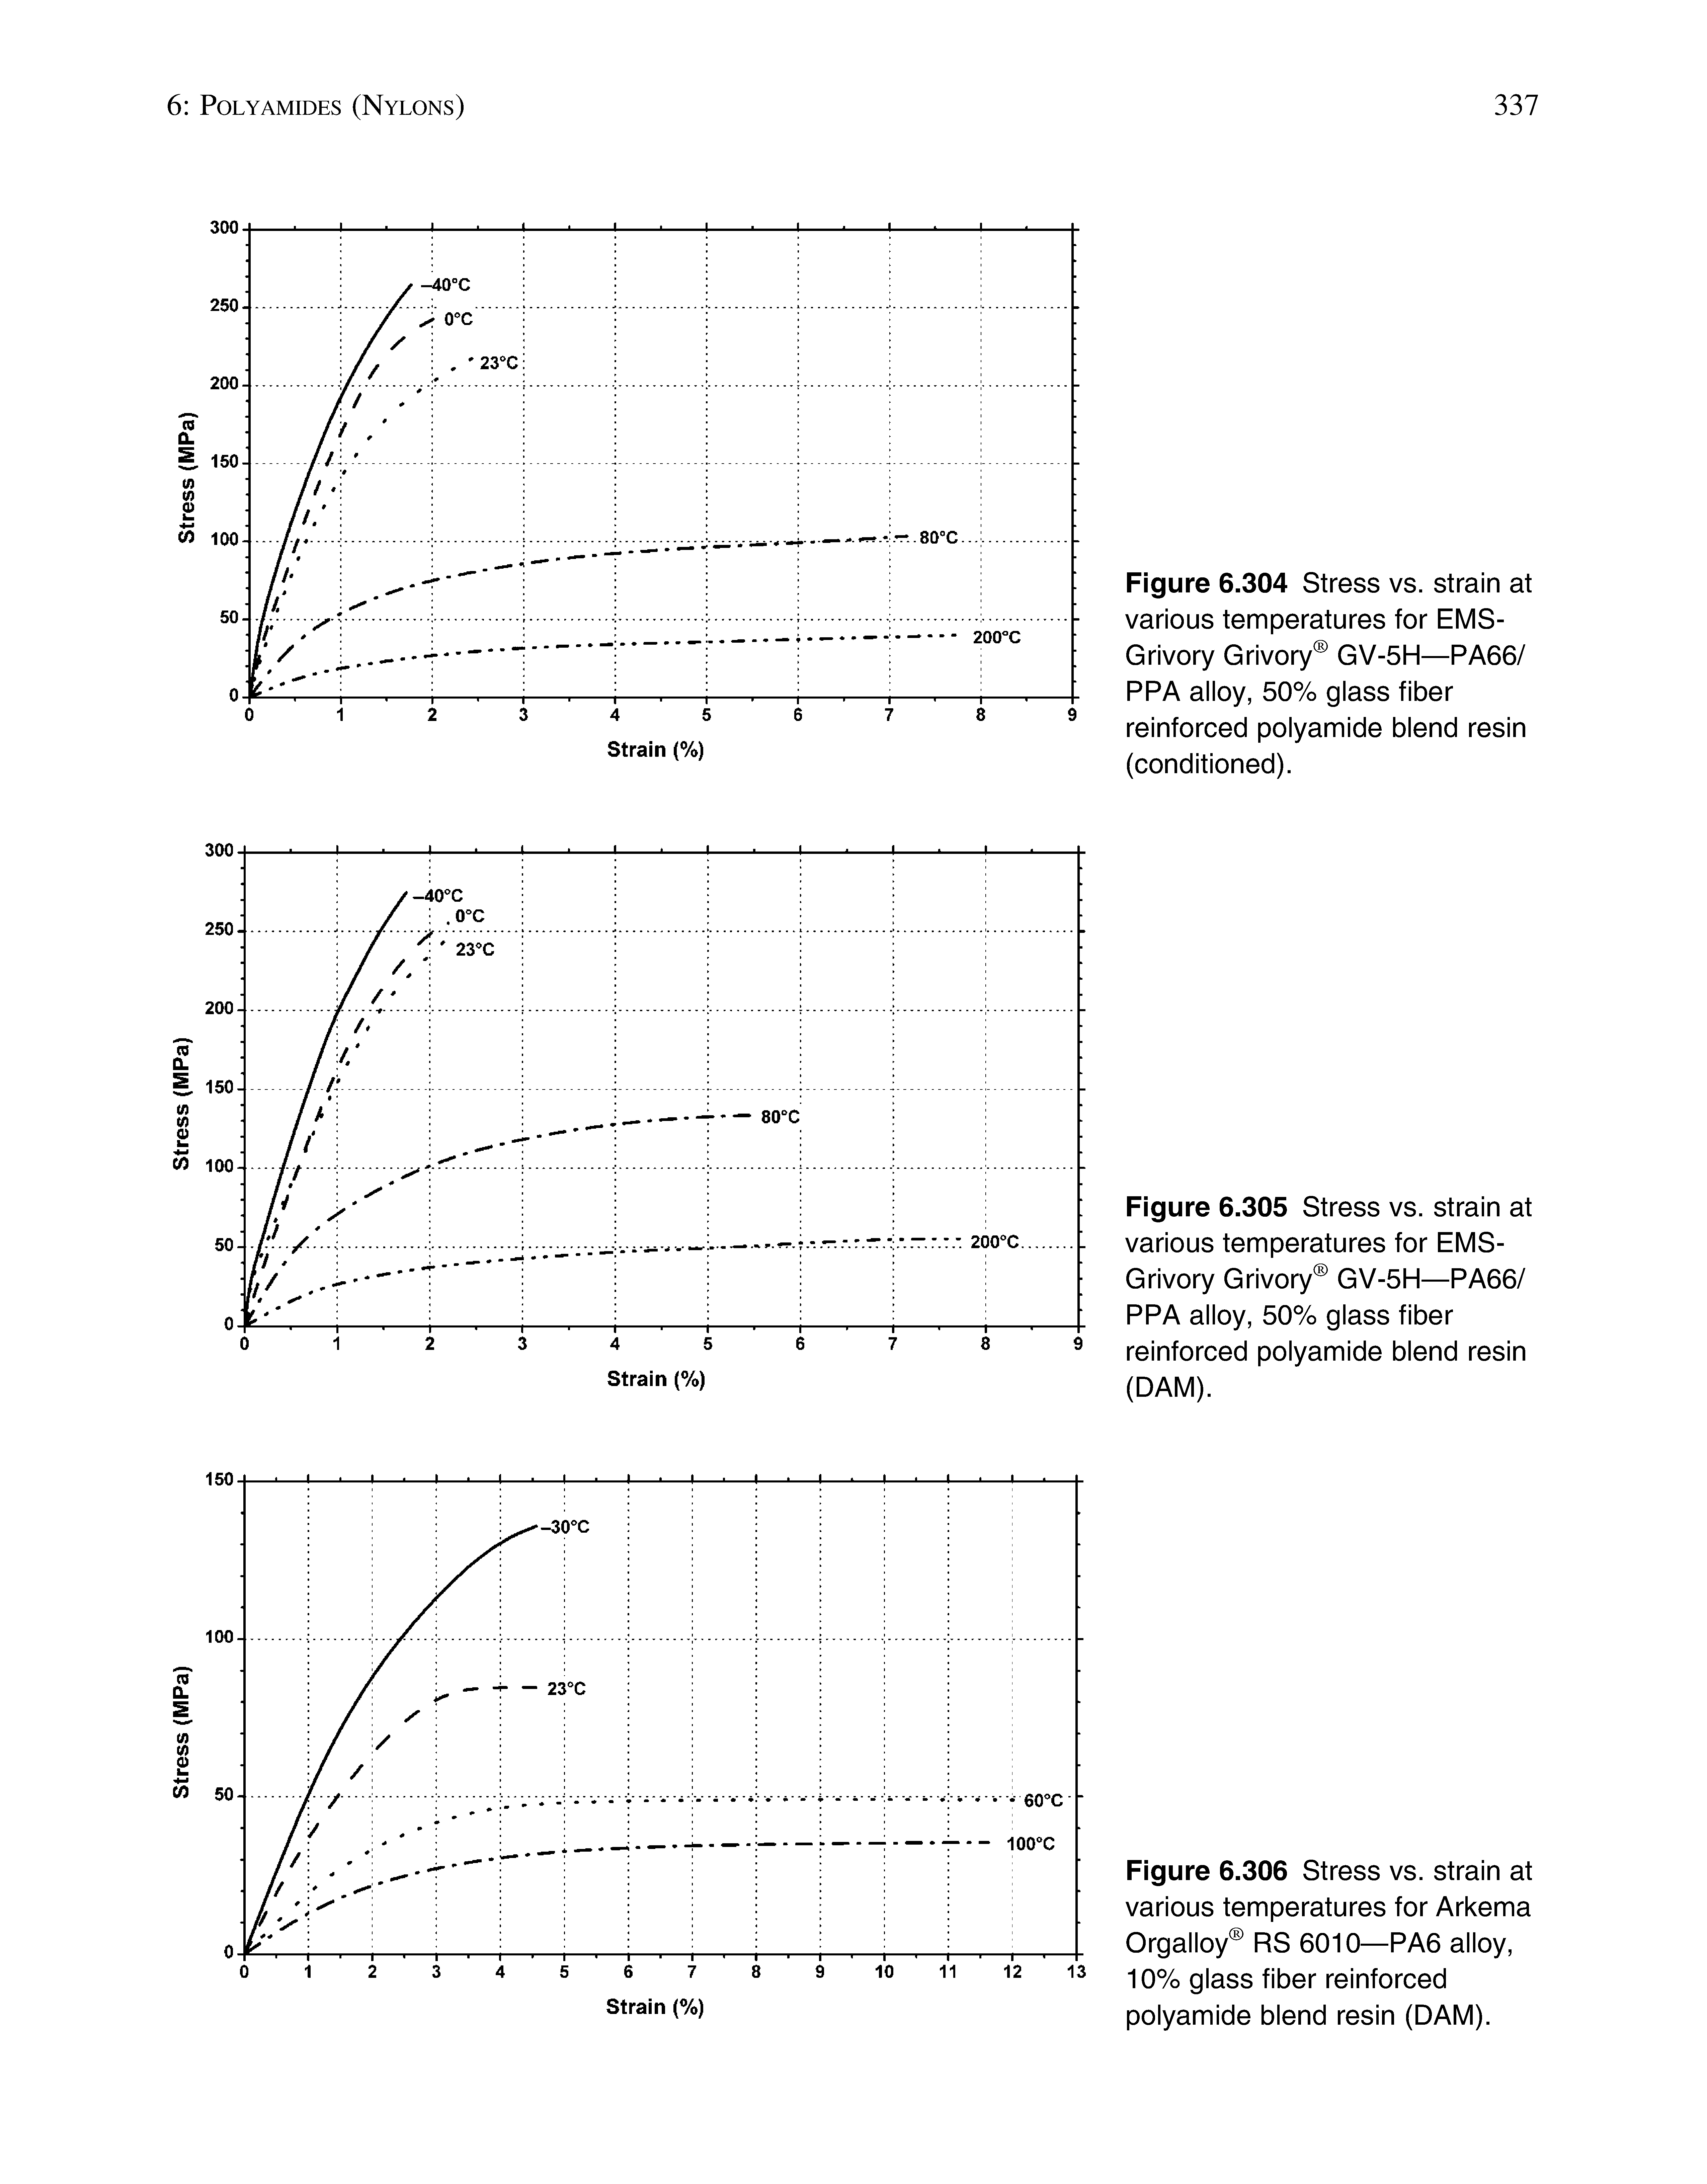 Figure 6.305 Stress vs. strain at various temperatures for EMS-Grivory Grivory GV-5H—PA66/ PPA alloy, 50% glass fiber reinforced polyamide blend resin (DAM).